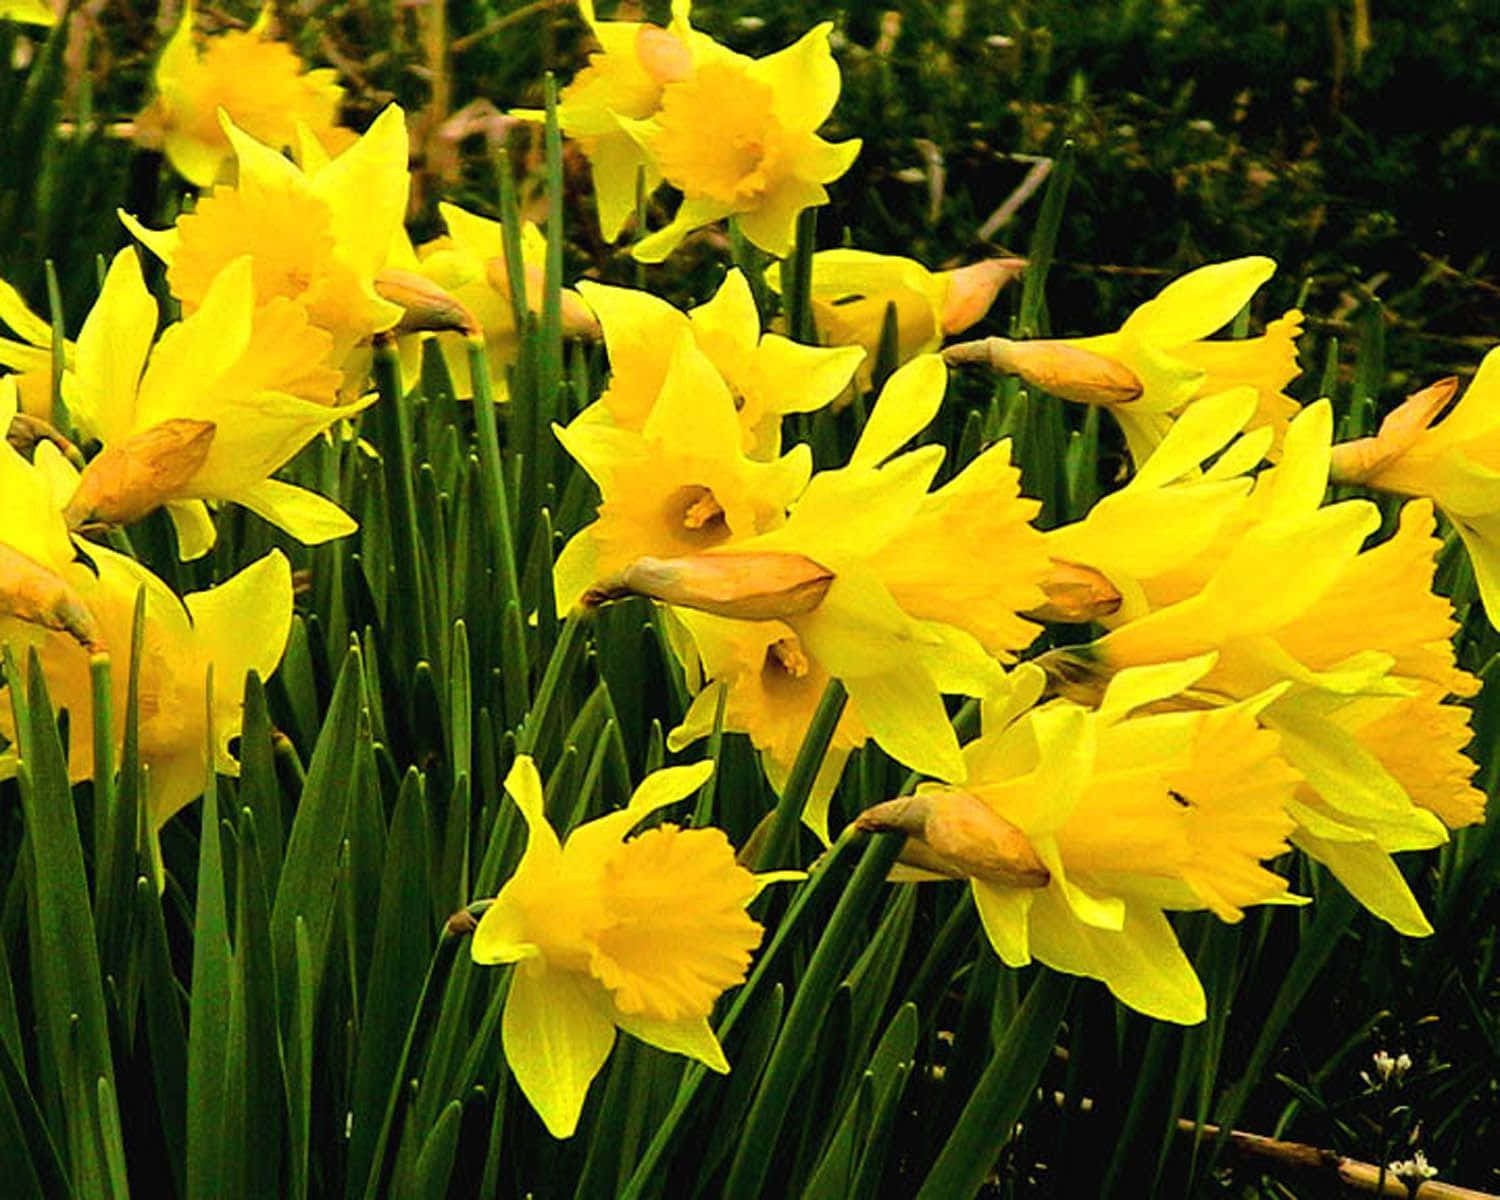 Bright and Colorful Daffodil Blooms